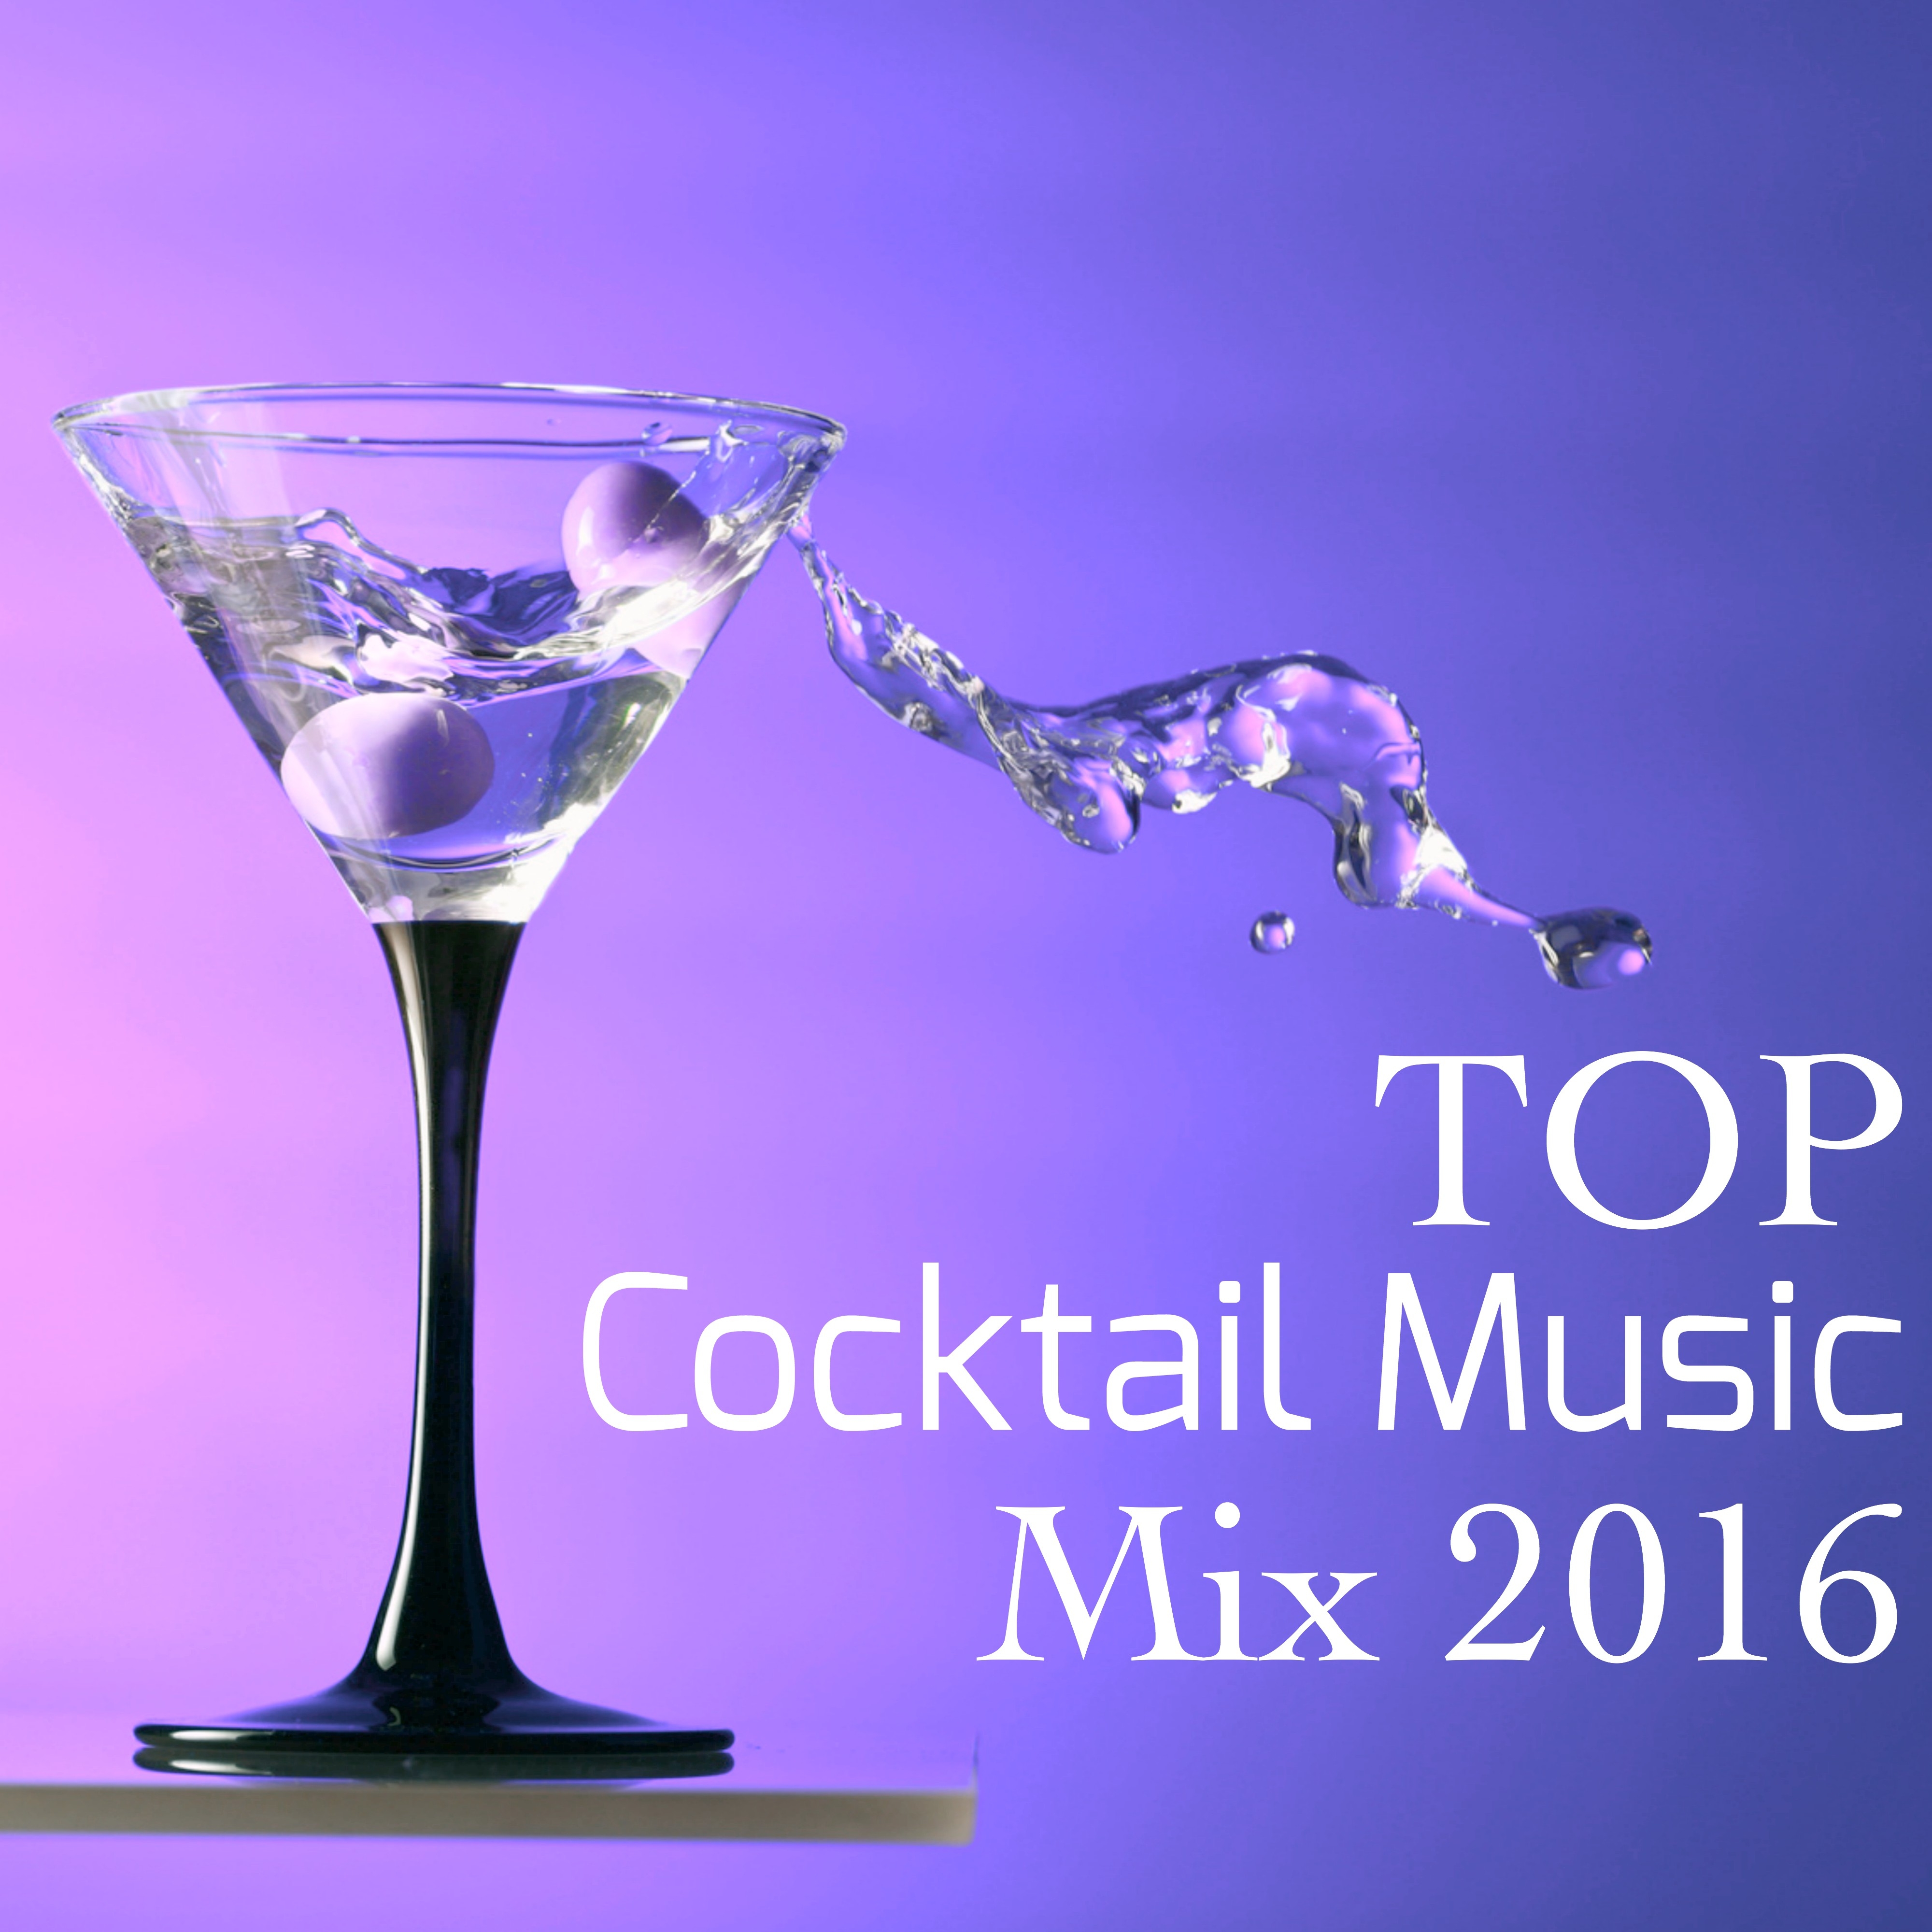 Top Cocktail Music Mix 2016 – Lounge Music for Cocktail Party, Best Chillout Songs